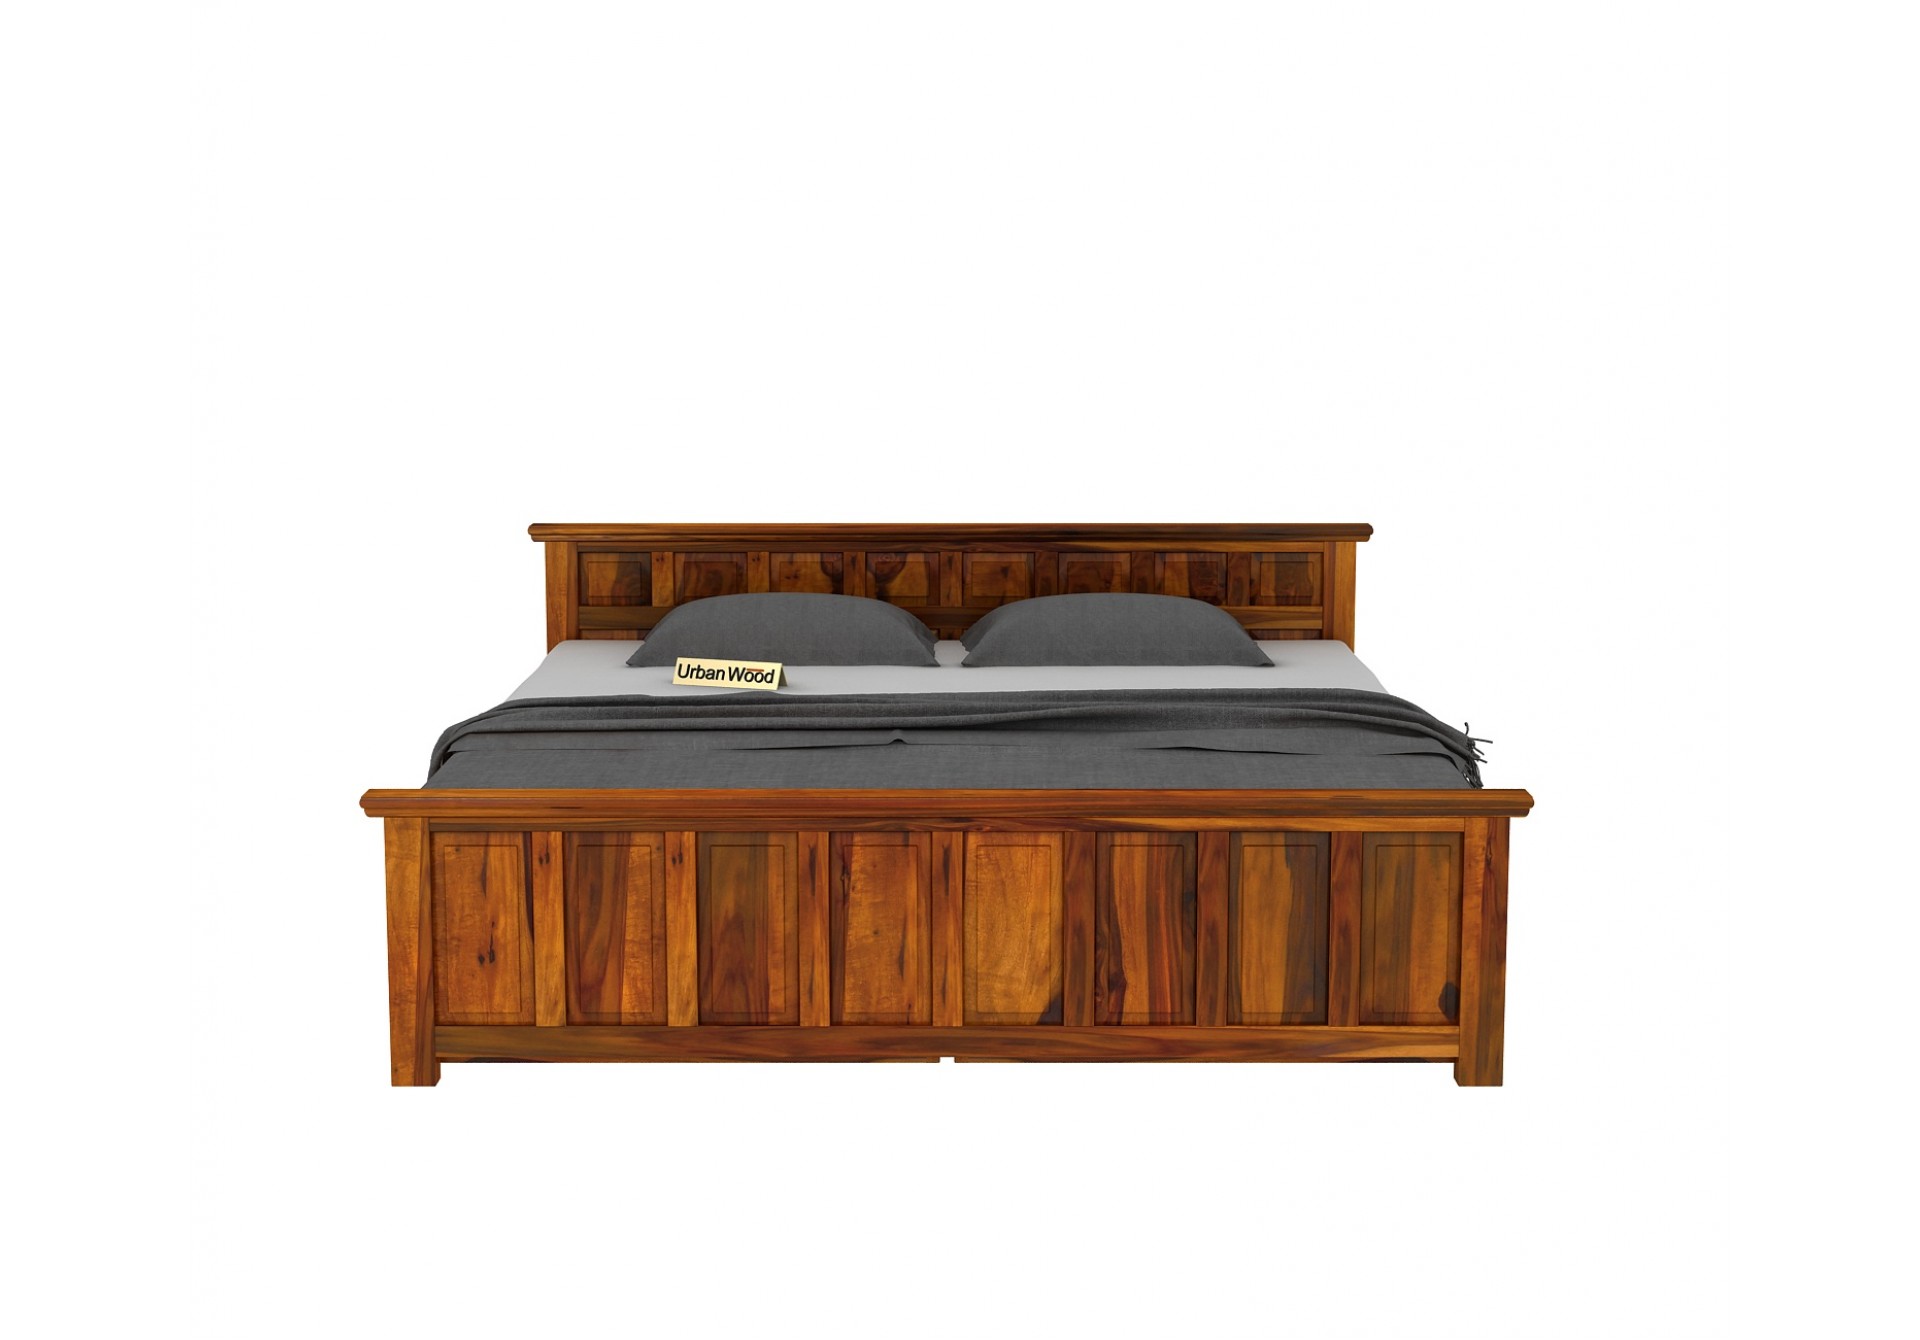 Thoms Bed With Drawer Storage ( king Size, Honey Finish )